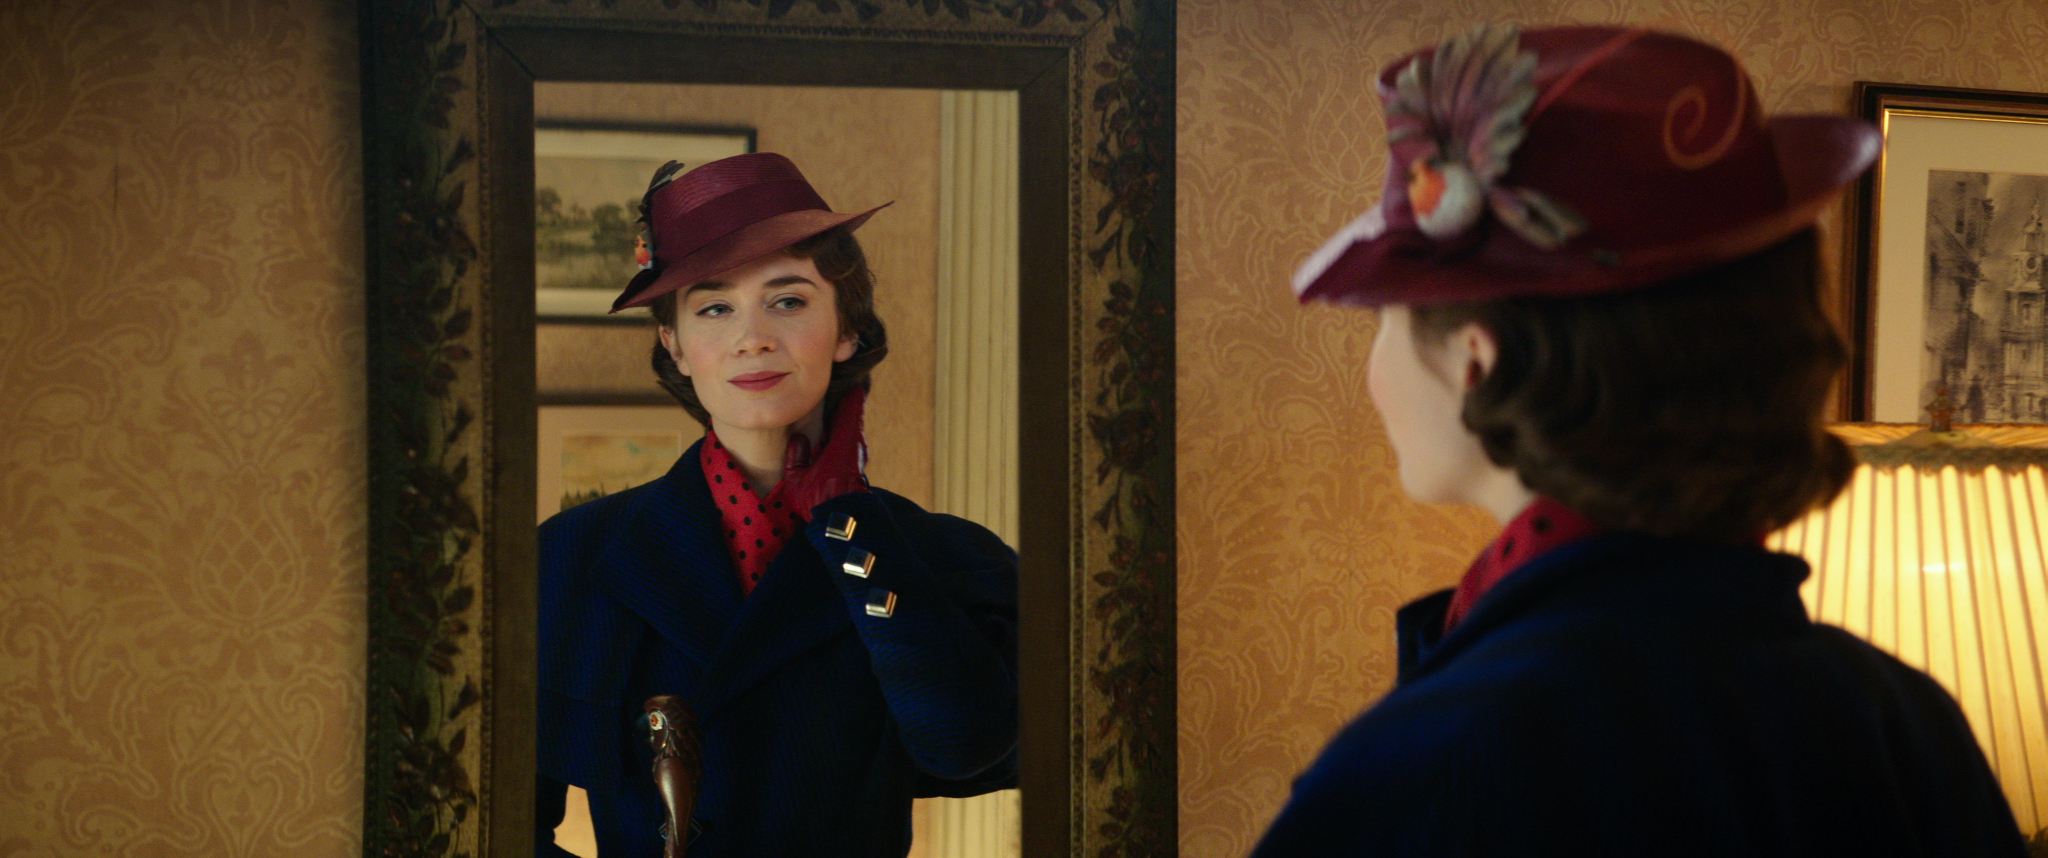 Mary Poppins (Emily Blunt) 